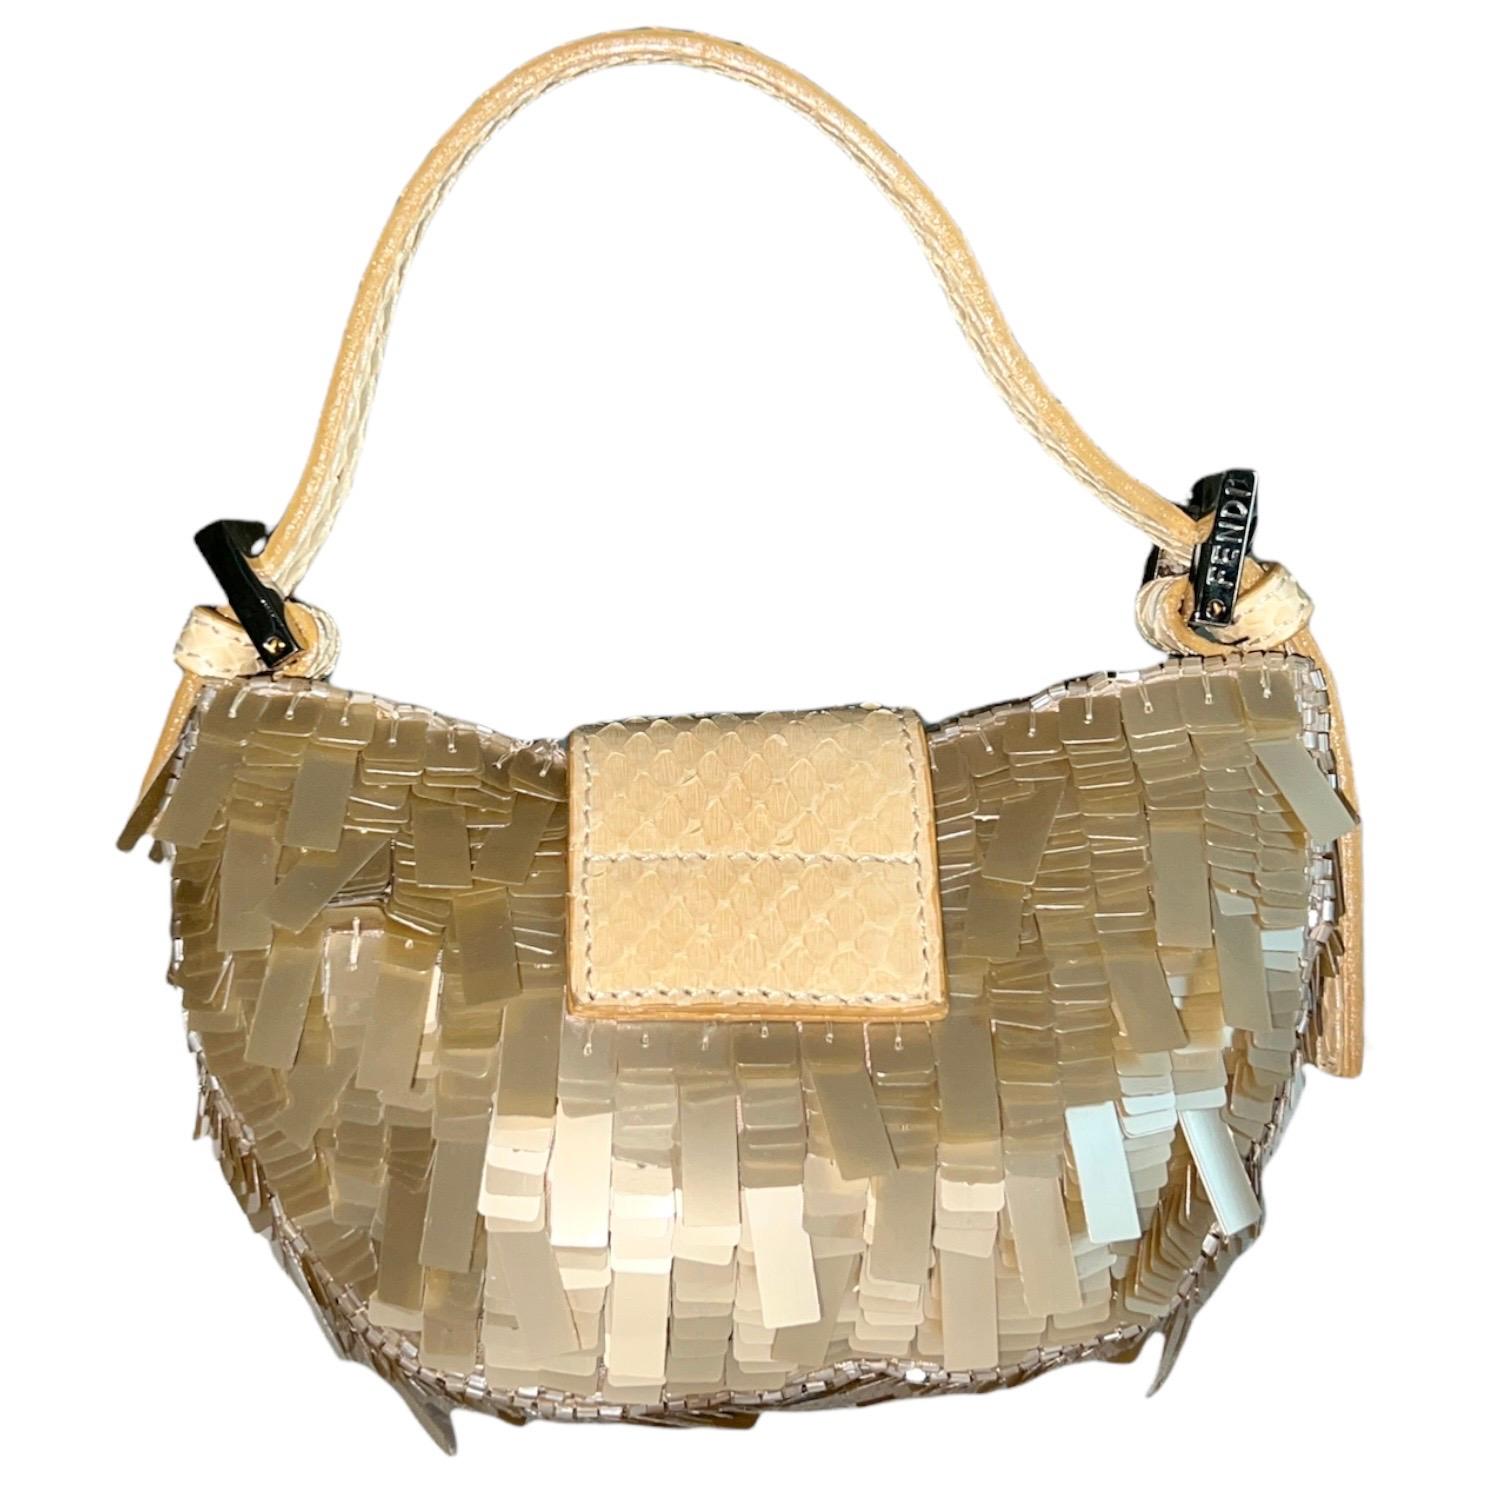 Special Piece!
Stunning Micro Baguette Bag by Fendi
Champagne-colored satin beautifully embroidered with sequins & pearls
FF Logo buckle closure
Exotic snakeskin trimming
Adjustable strap
Satin internal lining
Inner plaque with engraved Fendi